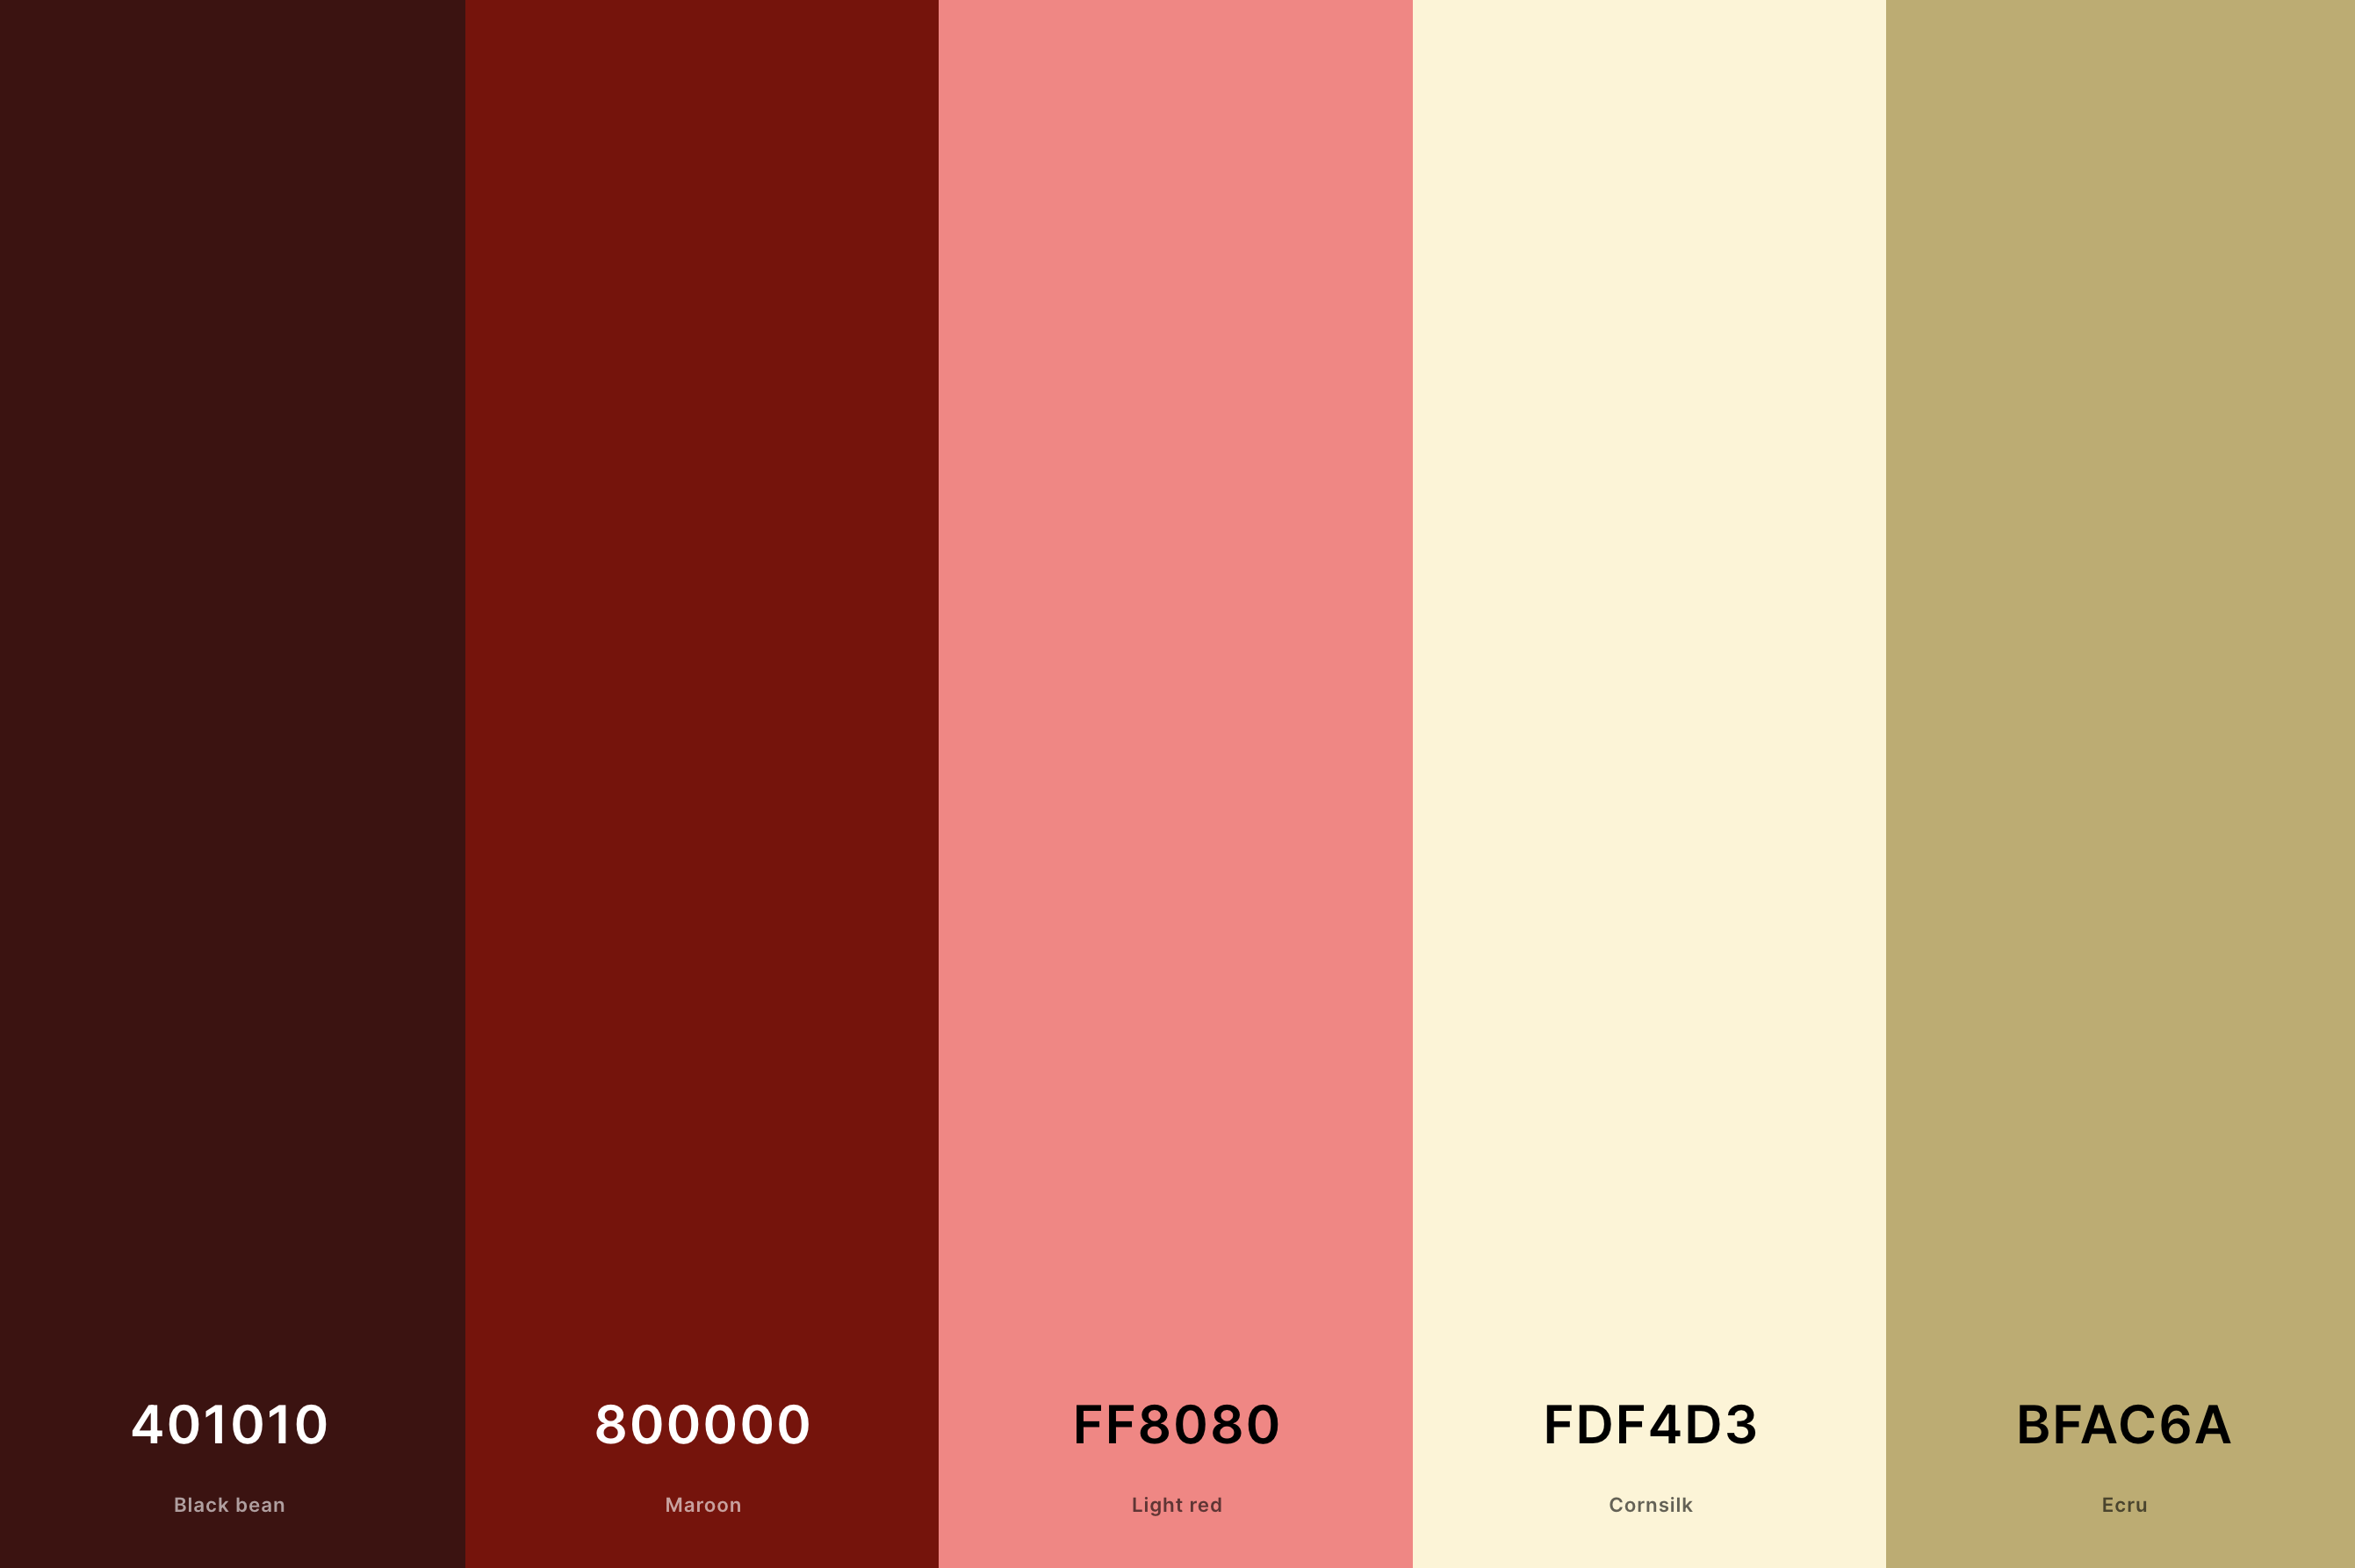 24. Cream And Maroon Color Palette Color Palette with Black Bean (Hex #401010) + Maroon (Hex #800000) + Light Red (Hex #FF8080) + Cornsilk (Hex #FDF4D3) + Ecru (Hex #BFAC6A) Color Palette with Hex Codes